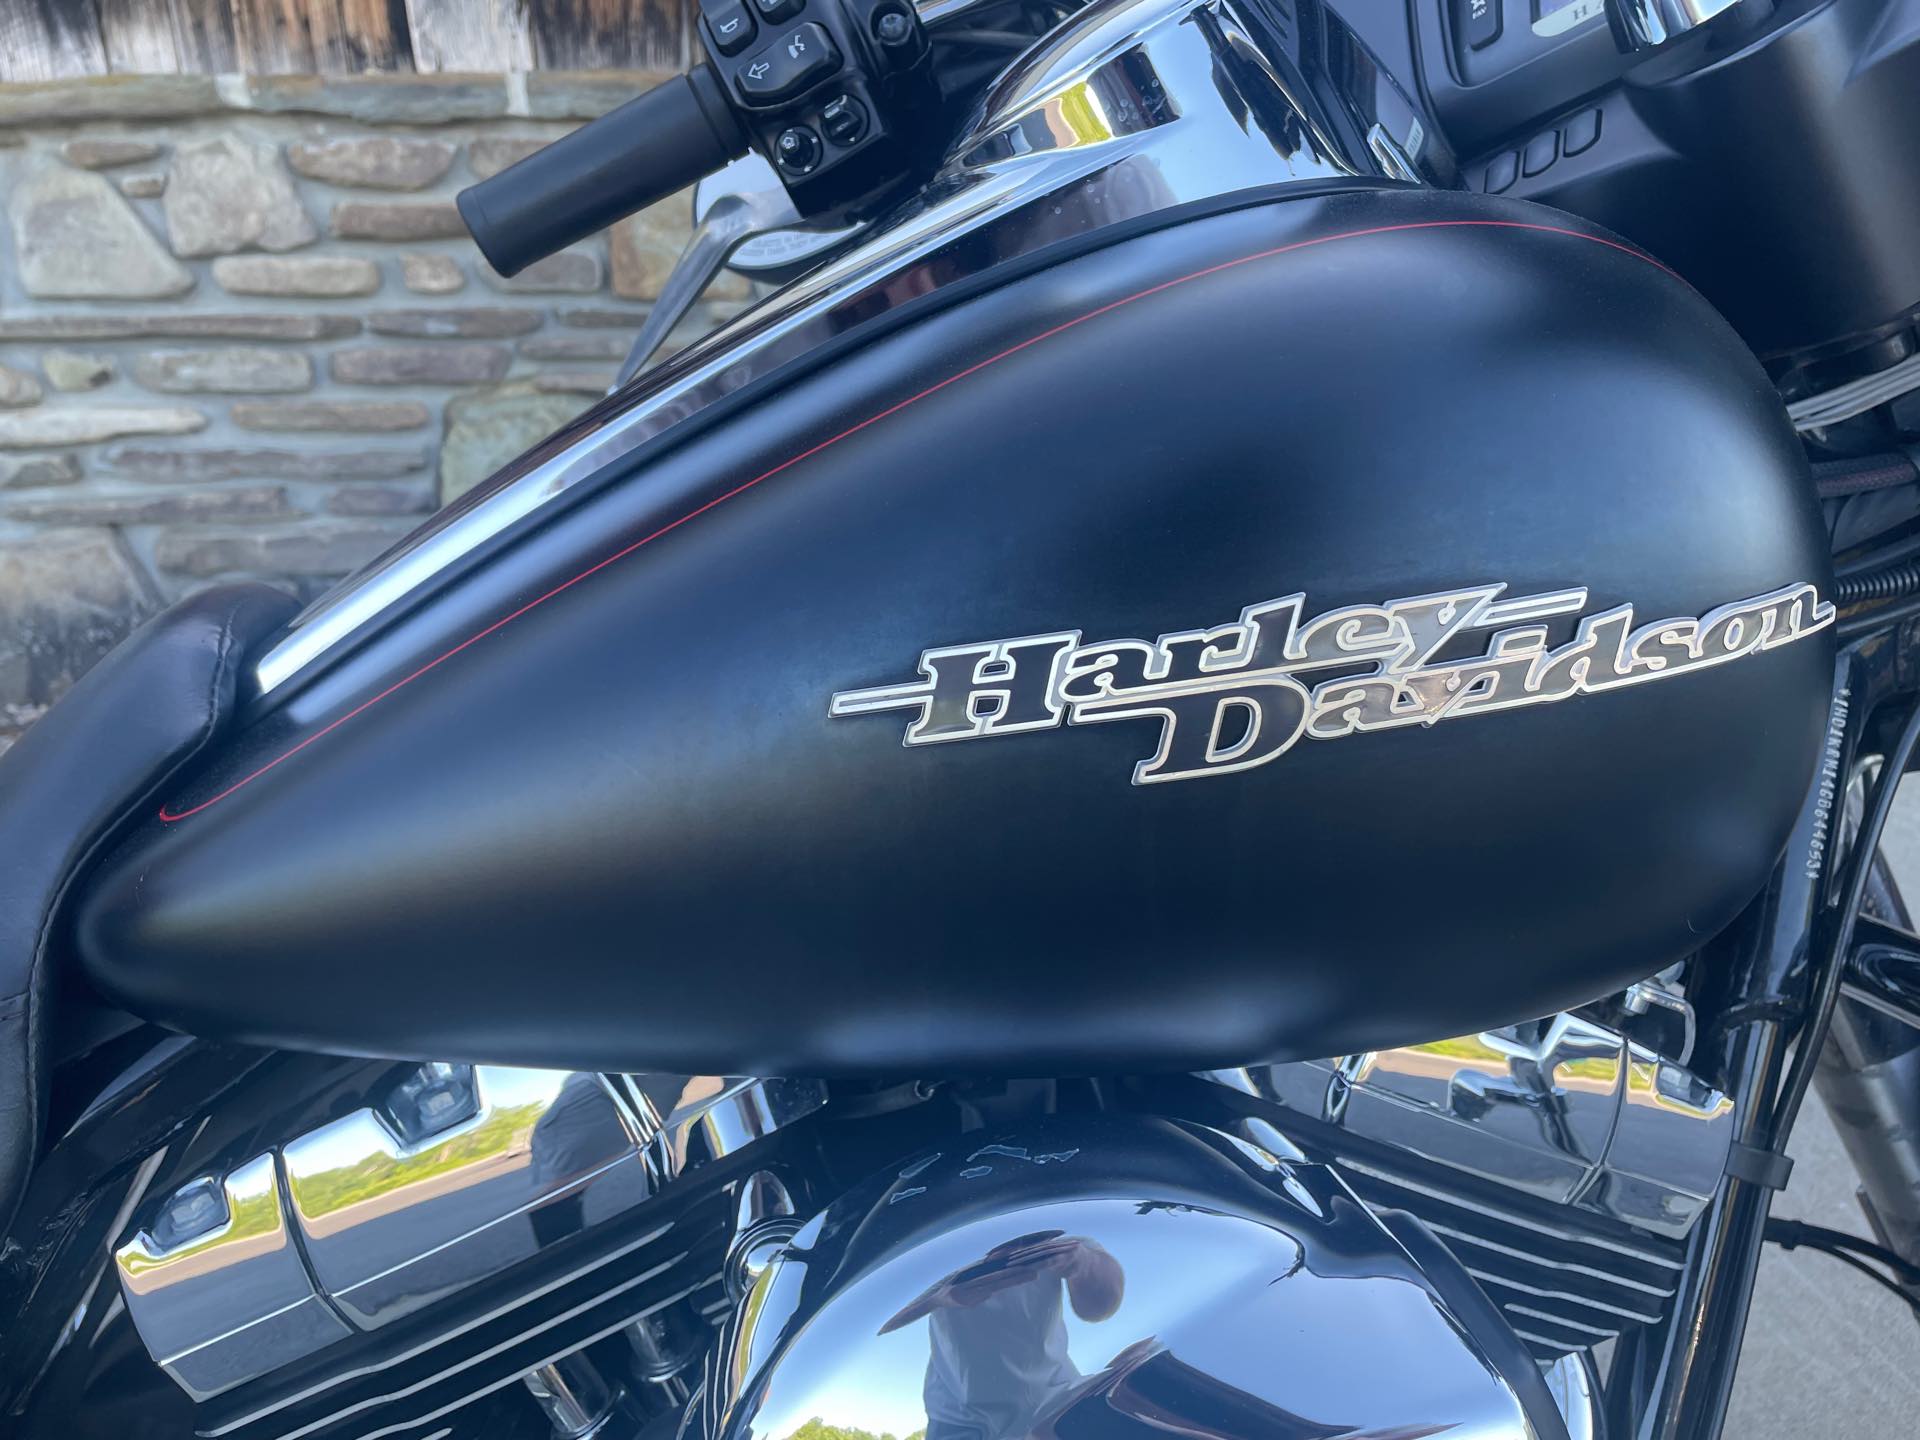 2016 Harley-Davidson Street Glide Special at Arkport Cycles